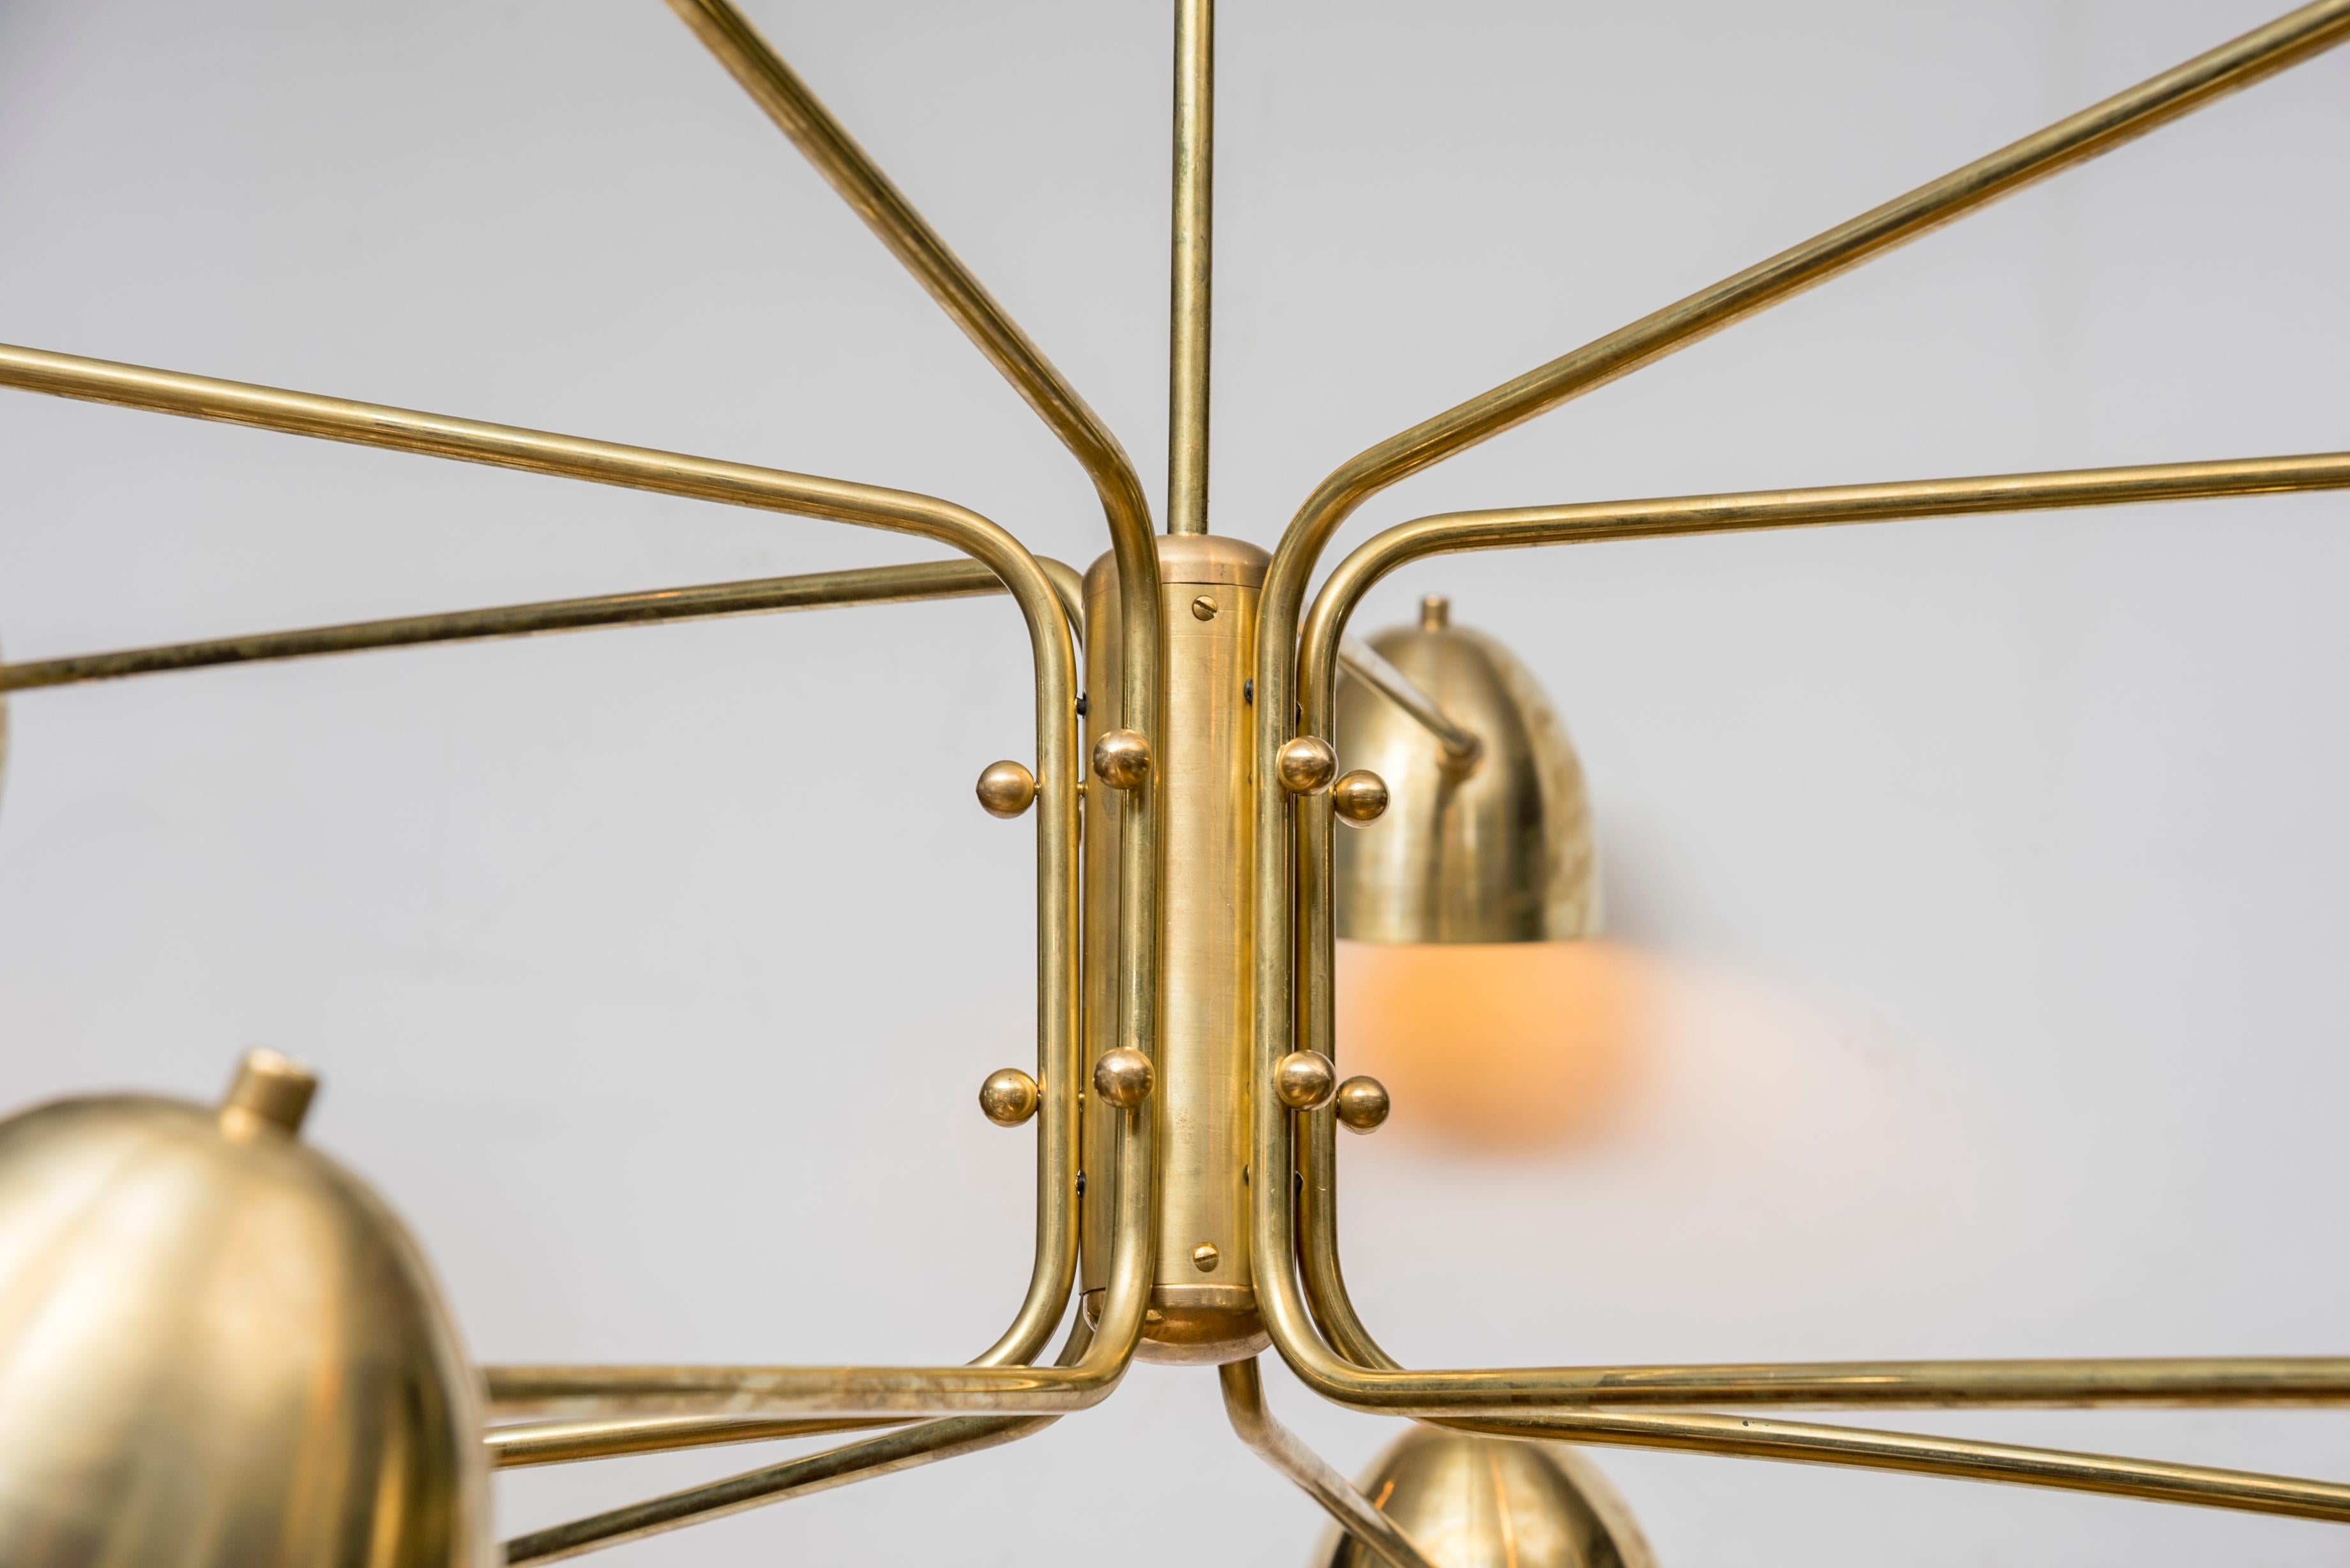 This contemporary brass chandelier is composed of 12 arms, each one holding a light bulb under a brass lampshade. This is an original creation by Studio Glustin, France, 2019.